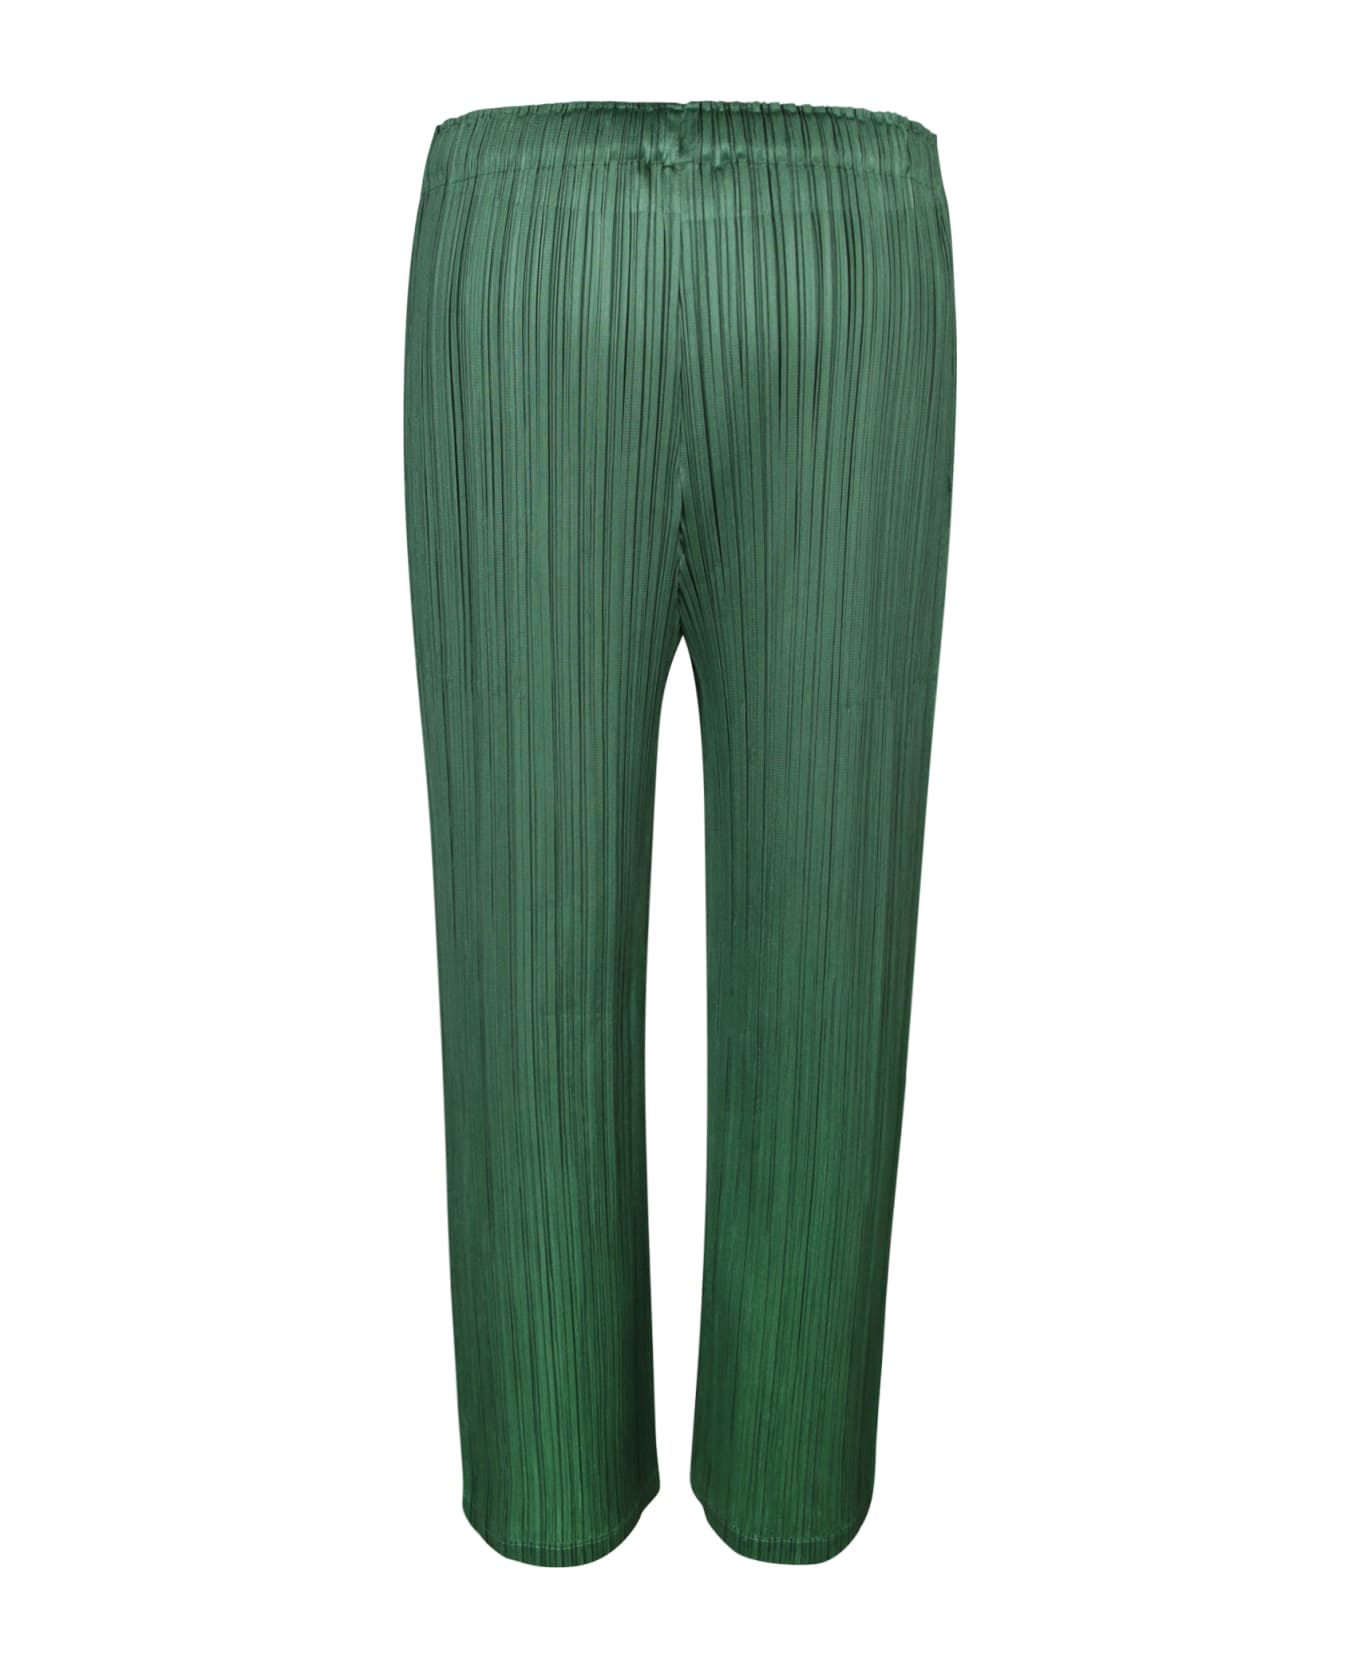 Issey Miyake Pleats Please Green Straight Trousers - Green ボトムス